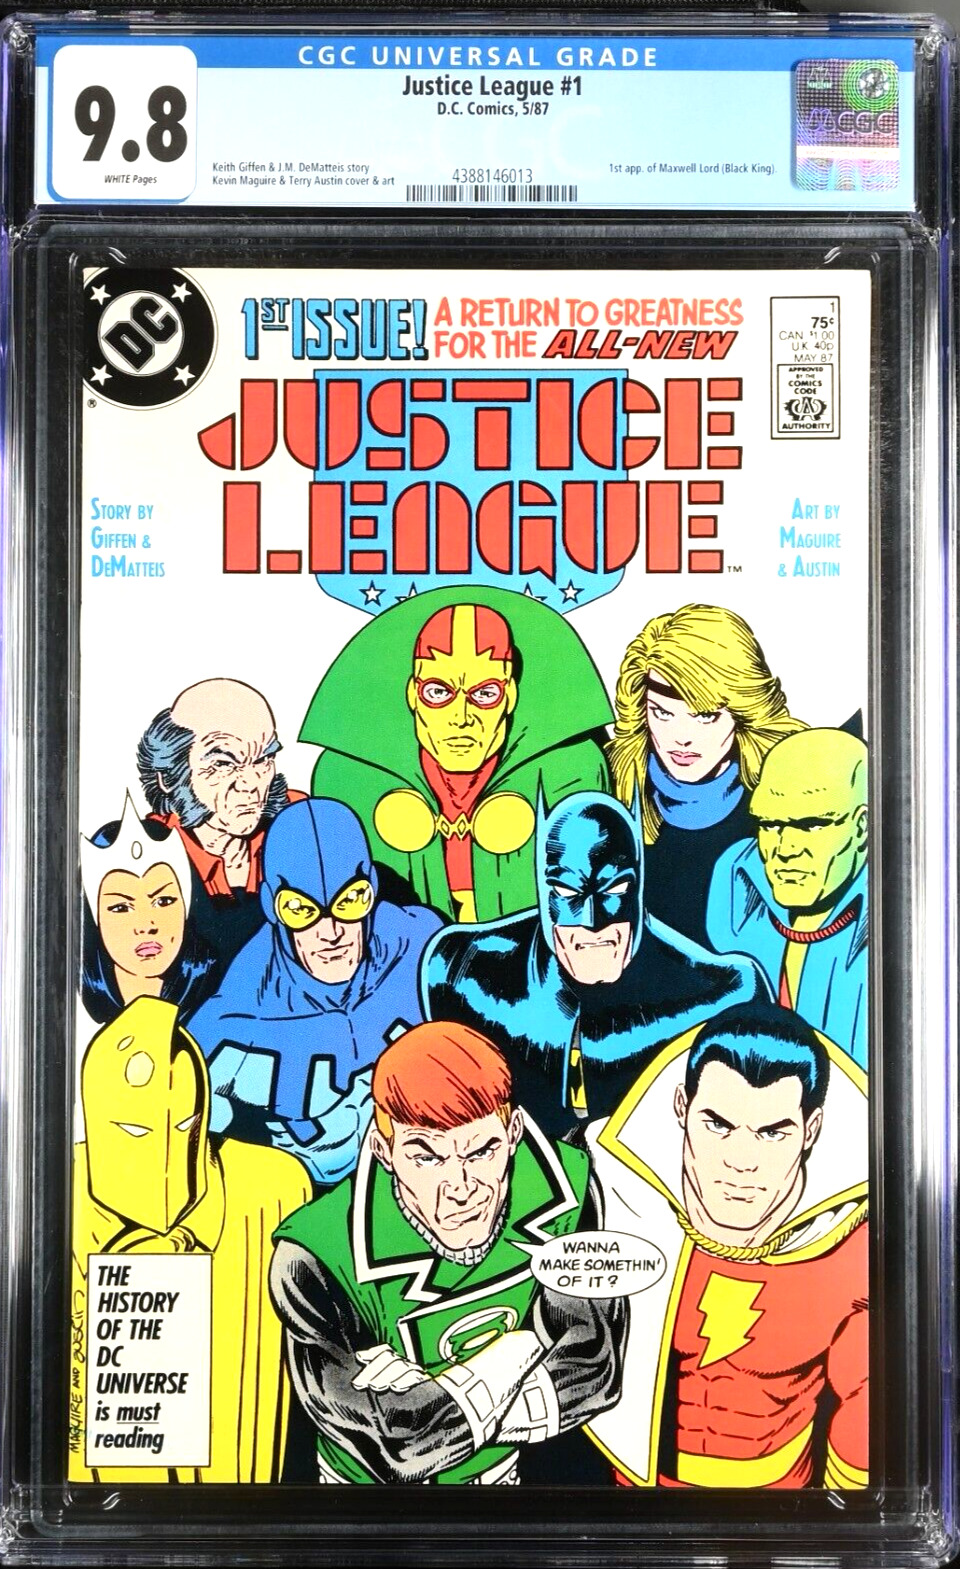 Justice League #1 CGC 9.8 (1987) 1st appearance of Maxwell Lord (Black King)